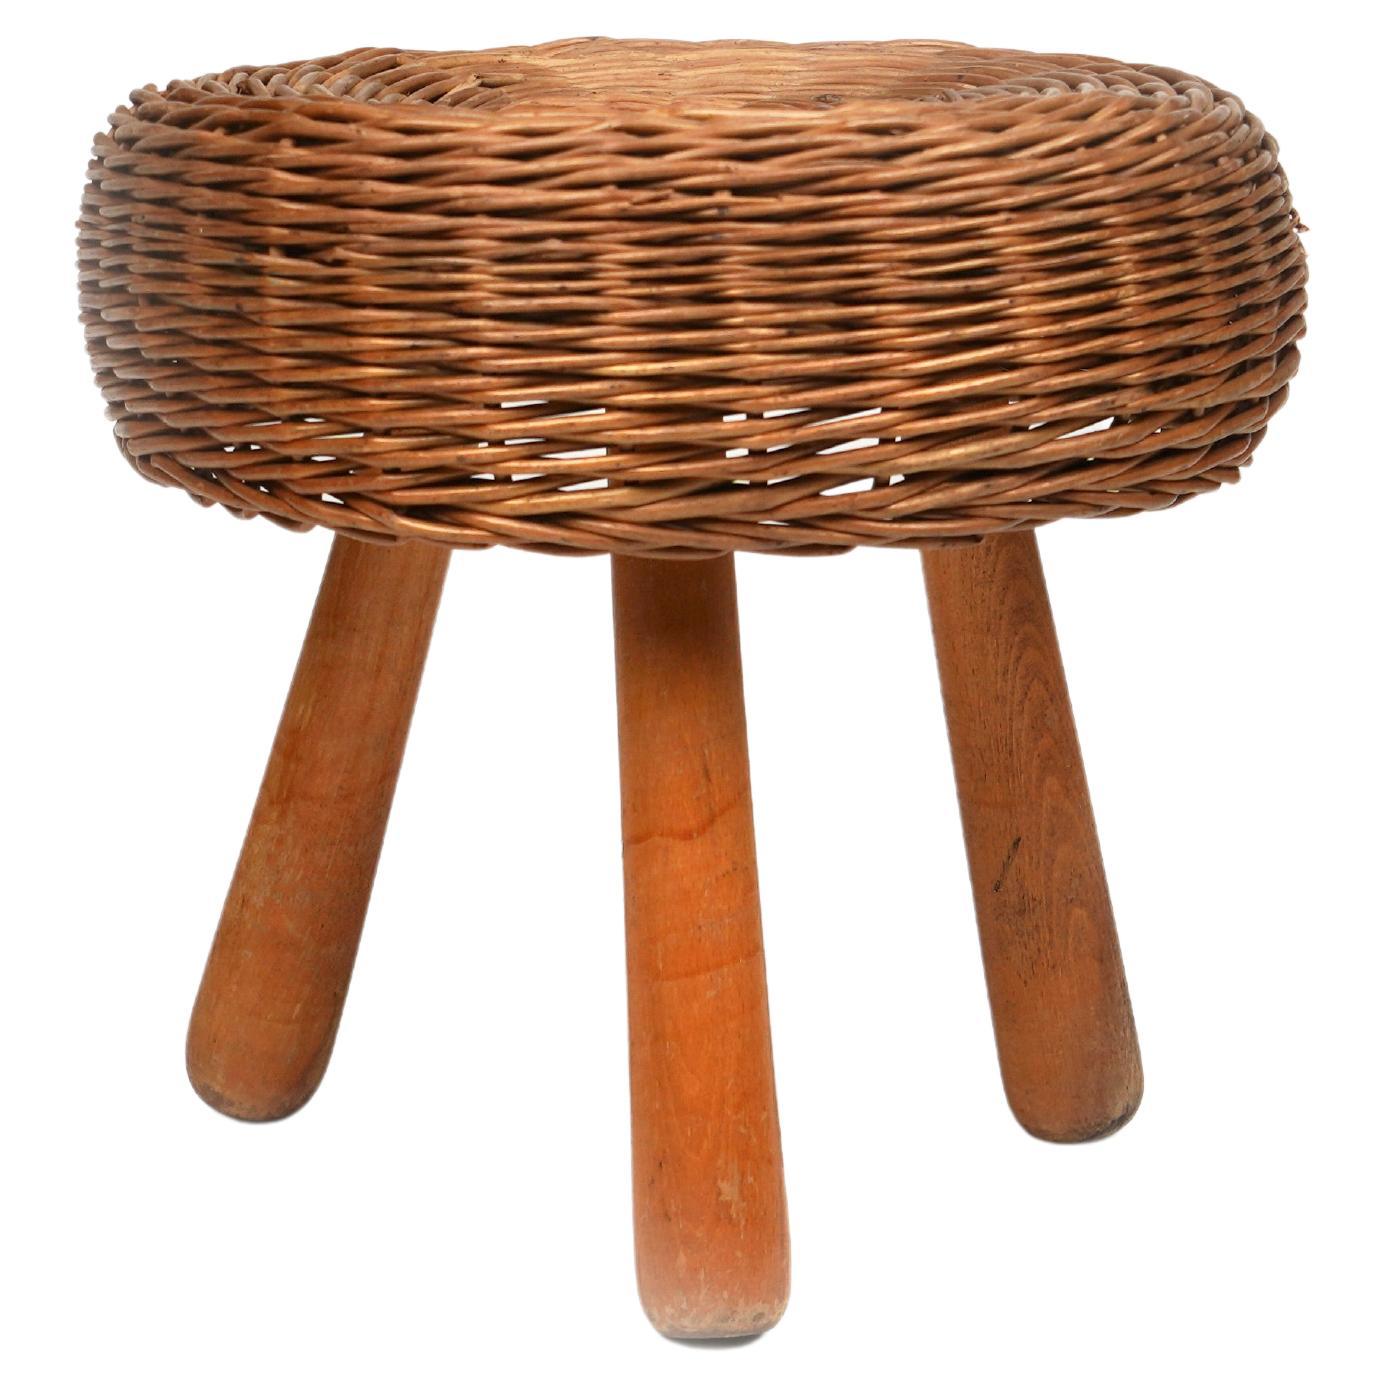 Beautiful midcentury round tripod stool in wicker and wood by Tony Paul.

Made in United States in the 1950s.

Tony Paul was a midcentury American designer known for his use of rattan and other natural materials. He was particularly skilled at